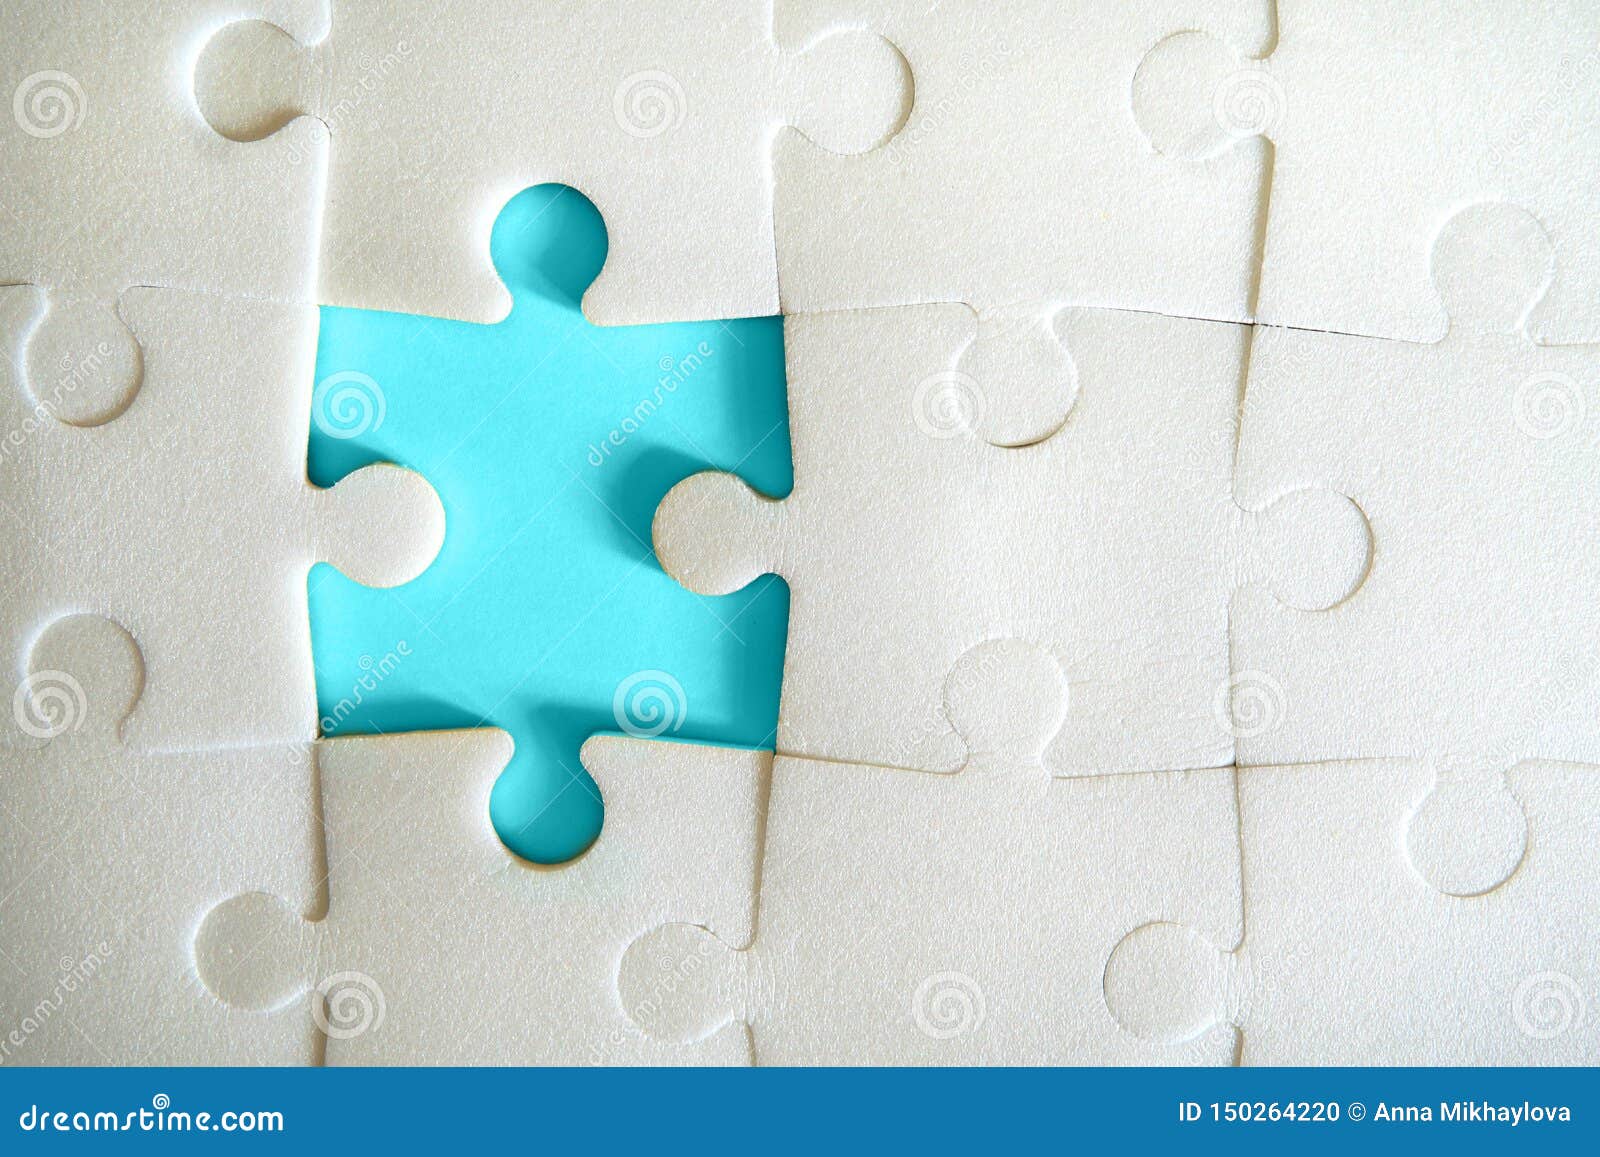 Puzzle Pieces Put Together. Stock Photo - Image of design, missing